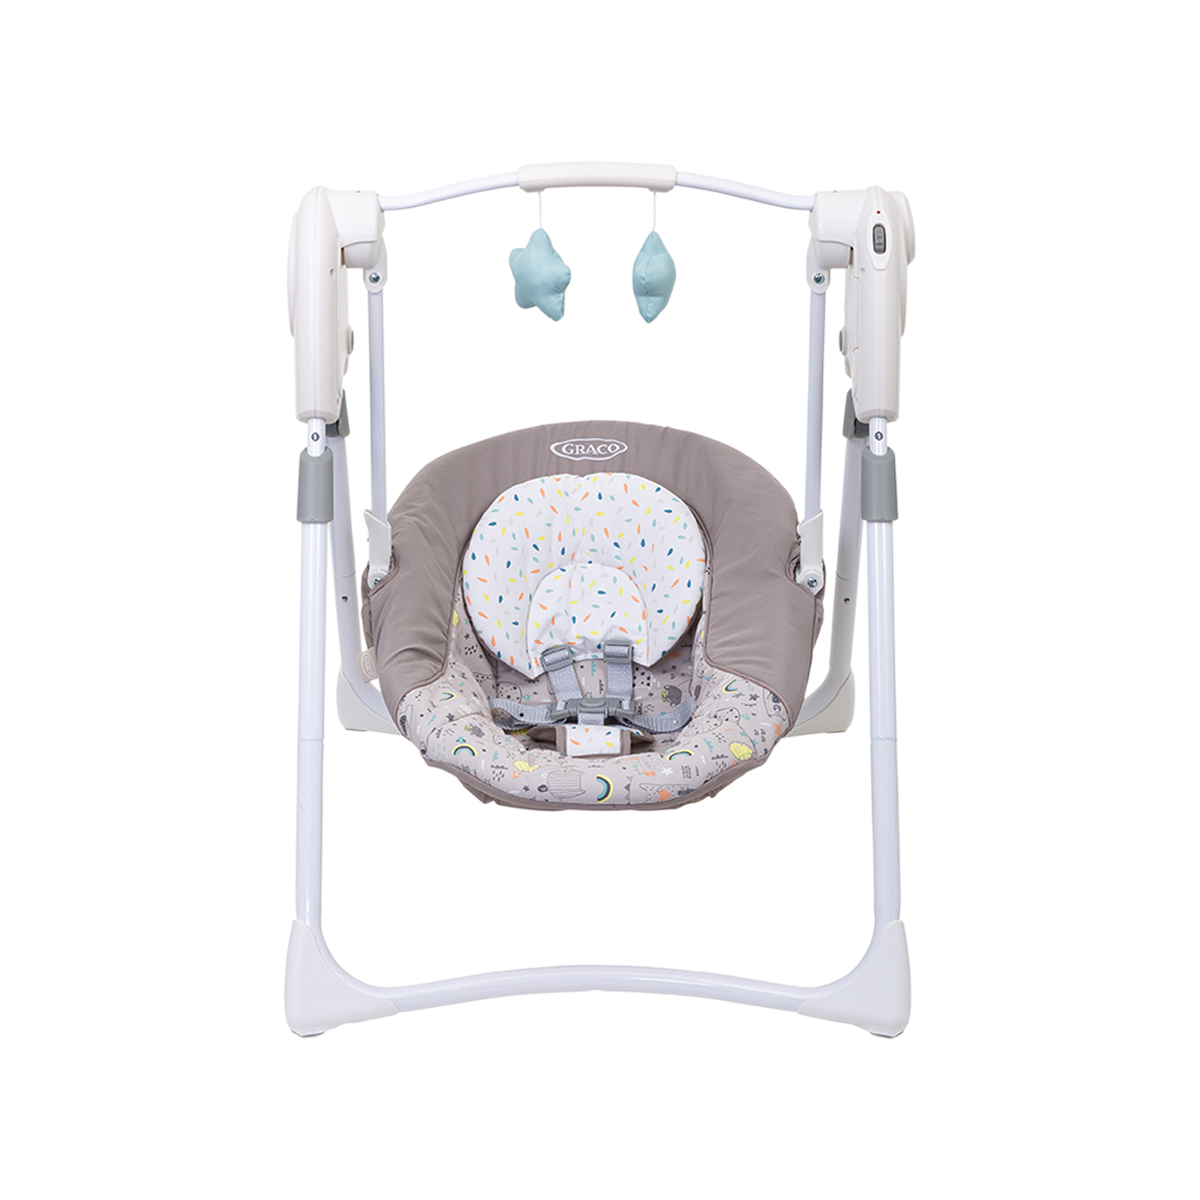 Graco Slim Spaces Compact Baby Swing, Space-Saving Design, Gray, Infant